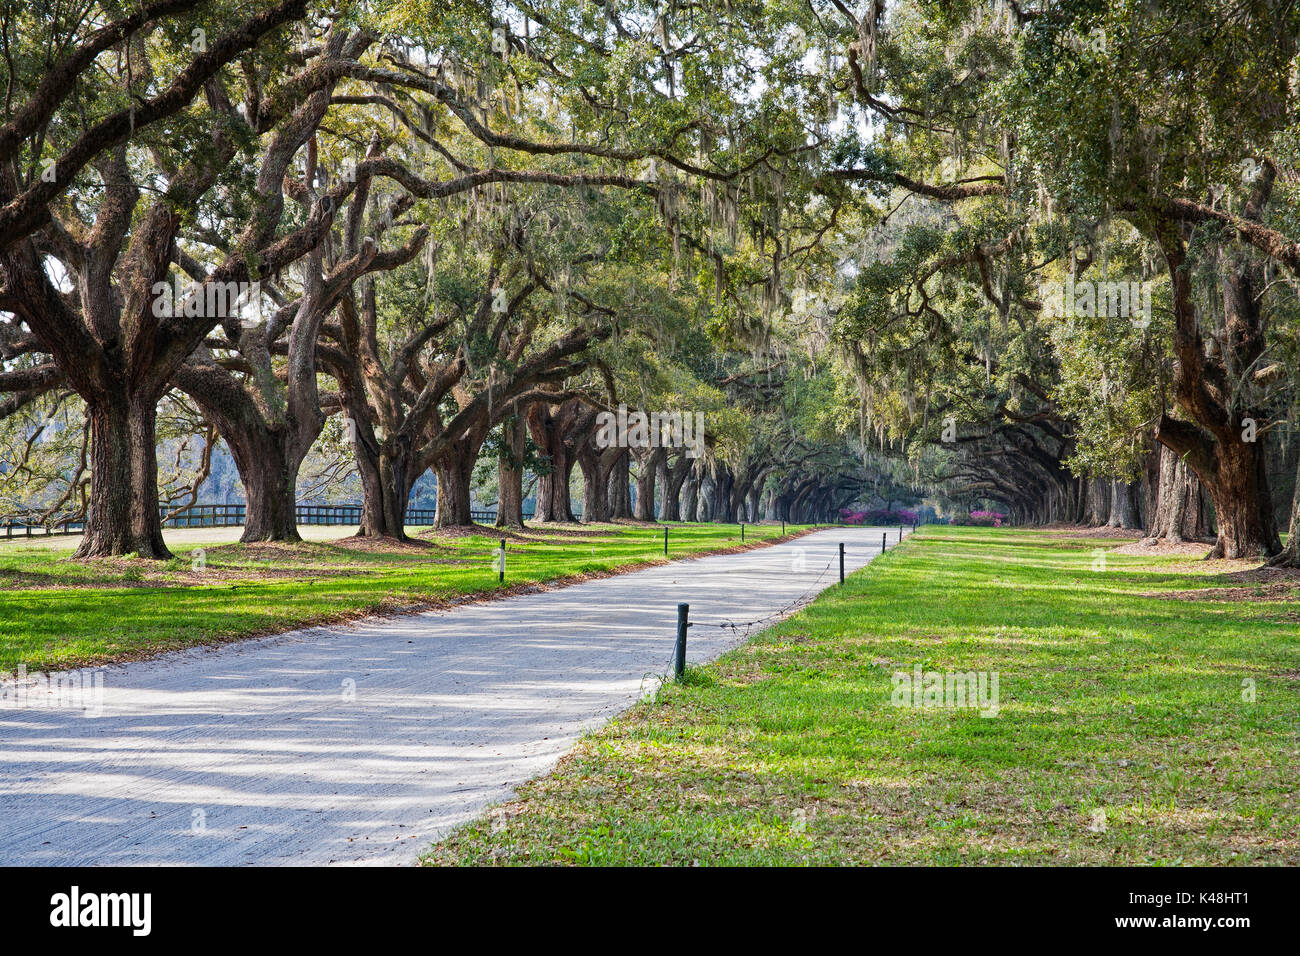 A stunning, country lane lined with ancient live oak trees draped in spanish moss. Near Charleton South Carolina, USA Stock Photo